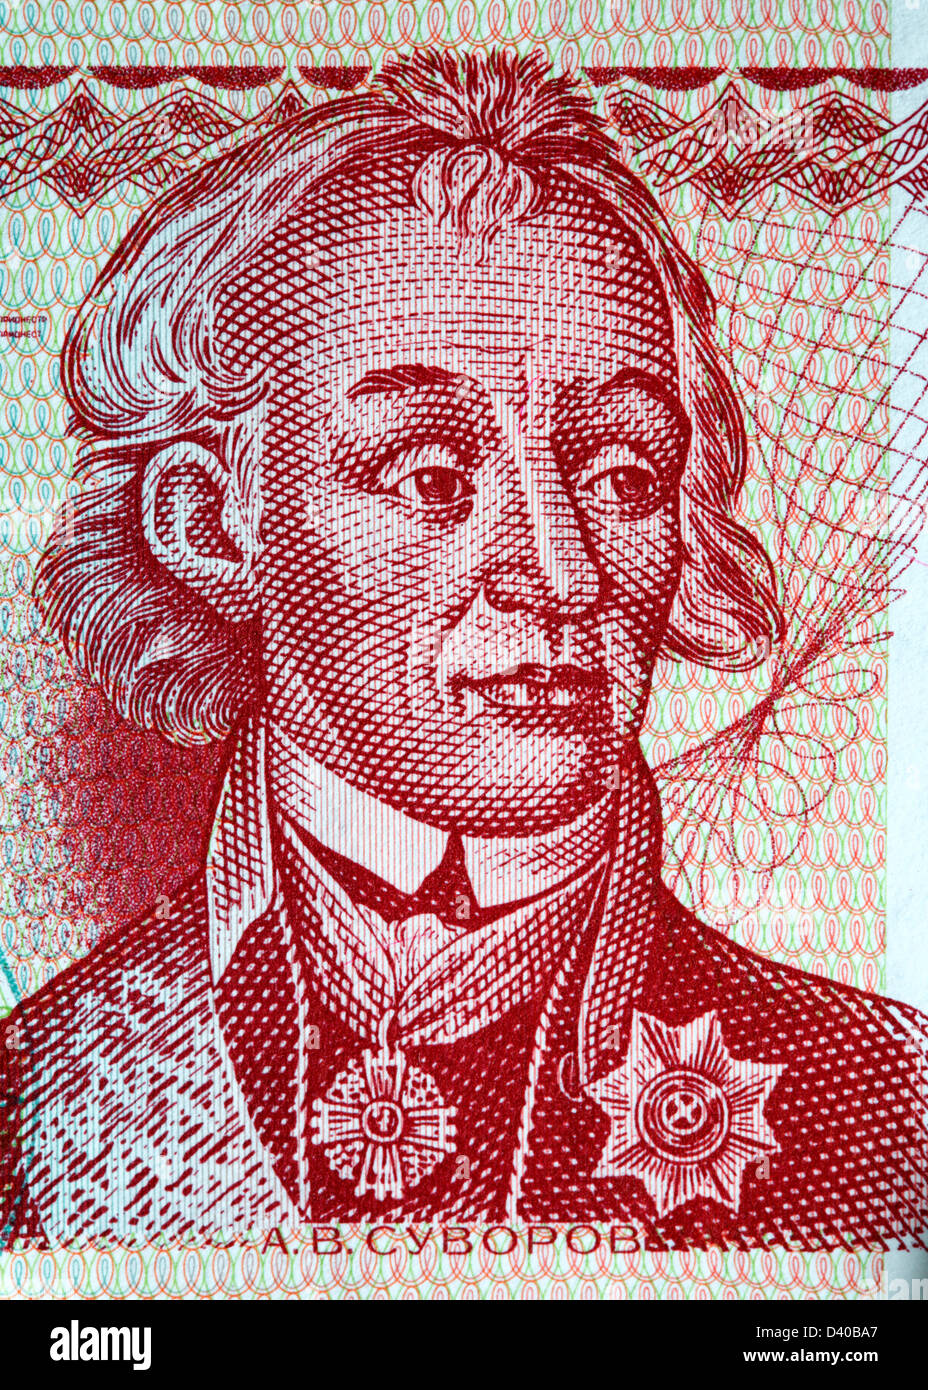 Portrait of Russian General Alexander Suvorov from 10 Ruble banknote, Transnistria, Moldova, 1994 Stock Photo